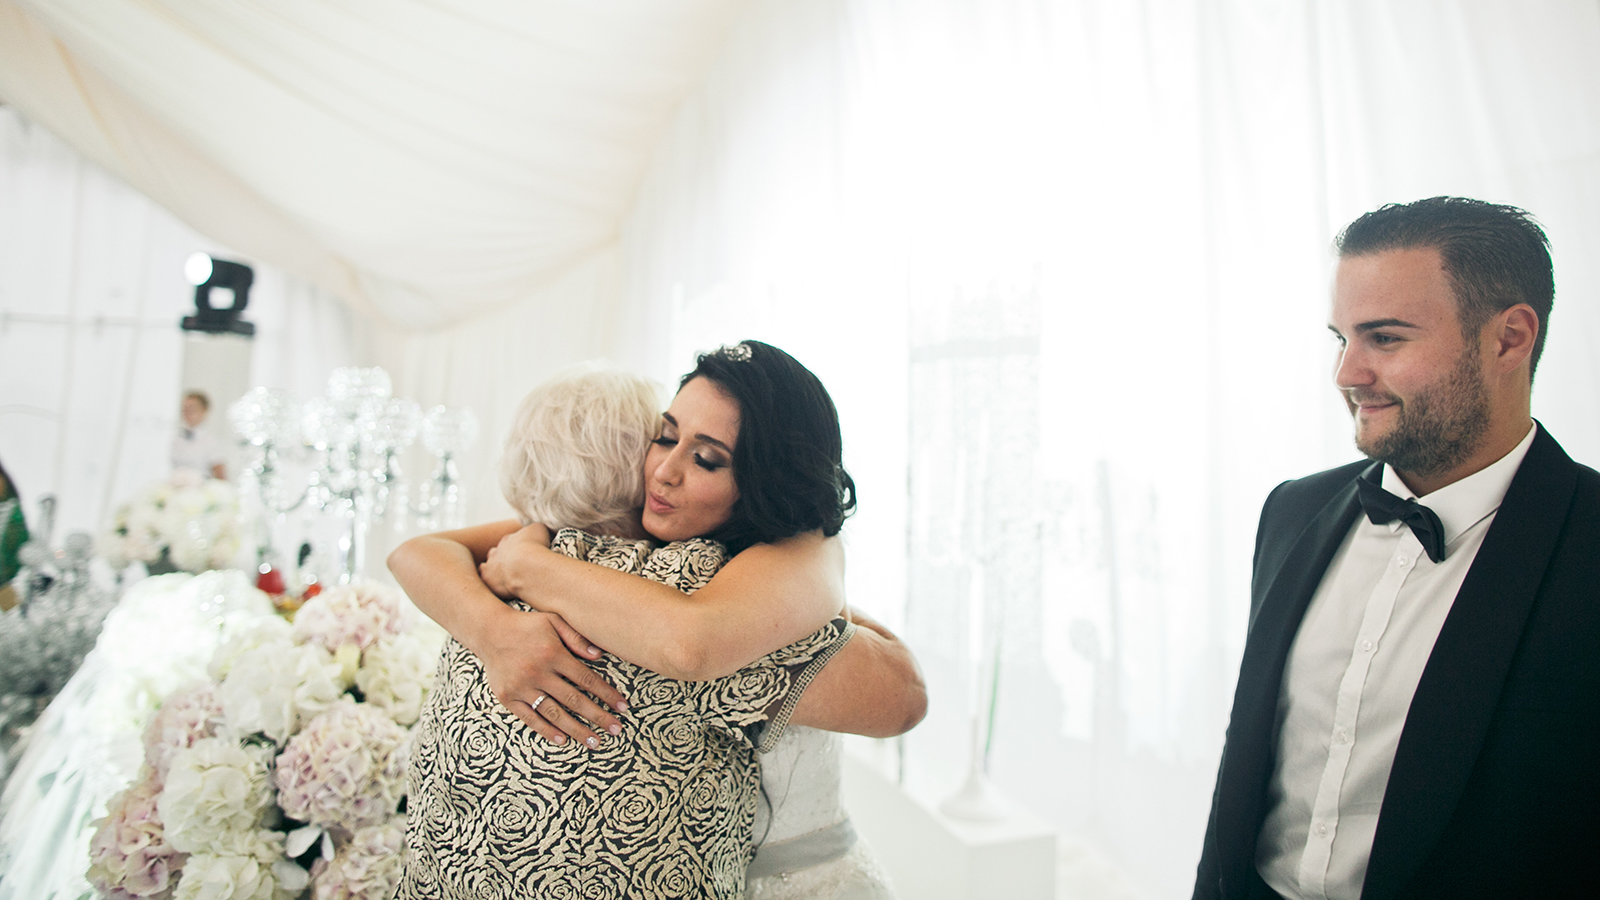 The charming bride embracing her mother